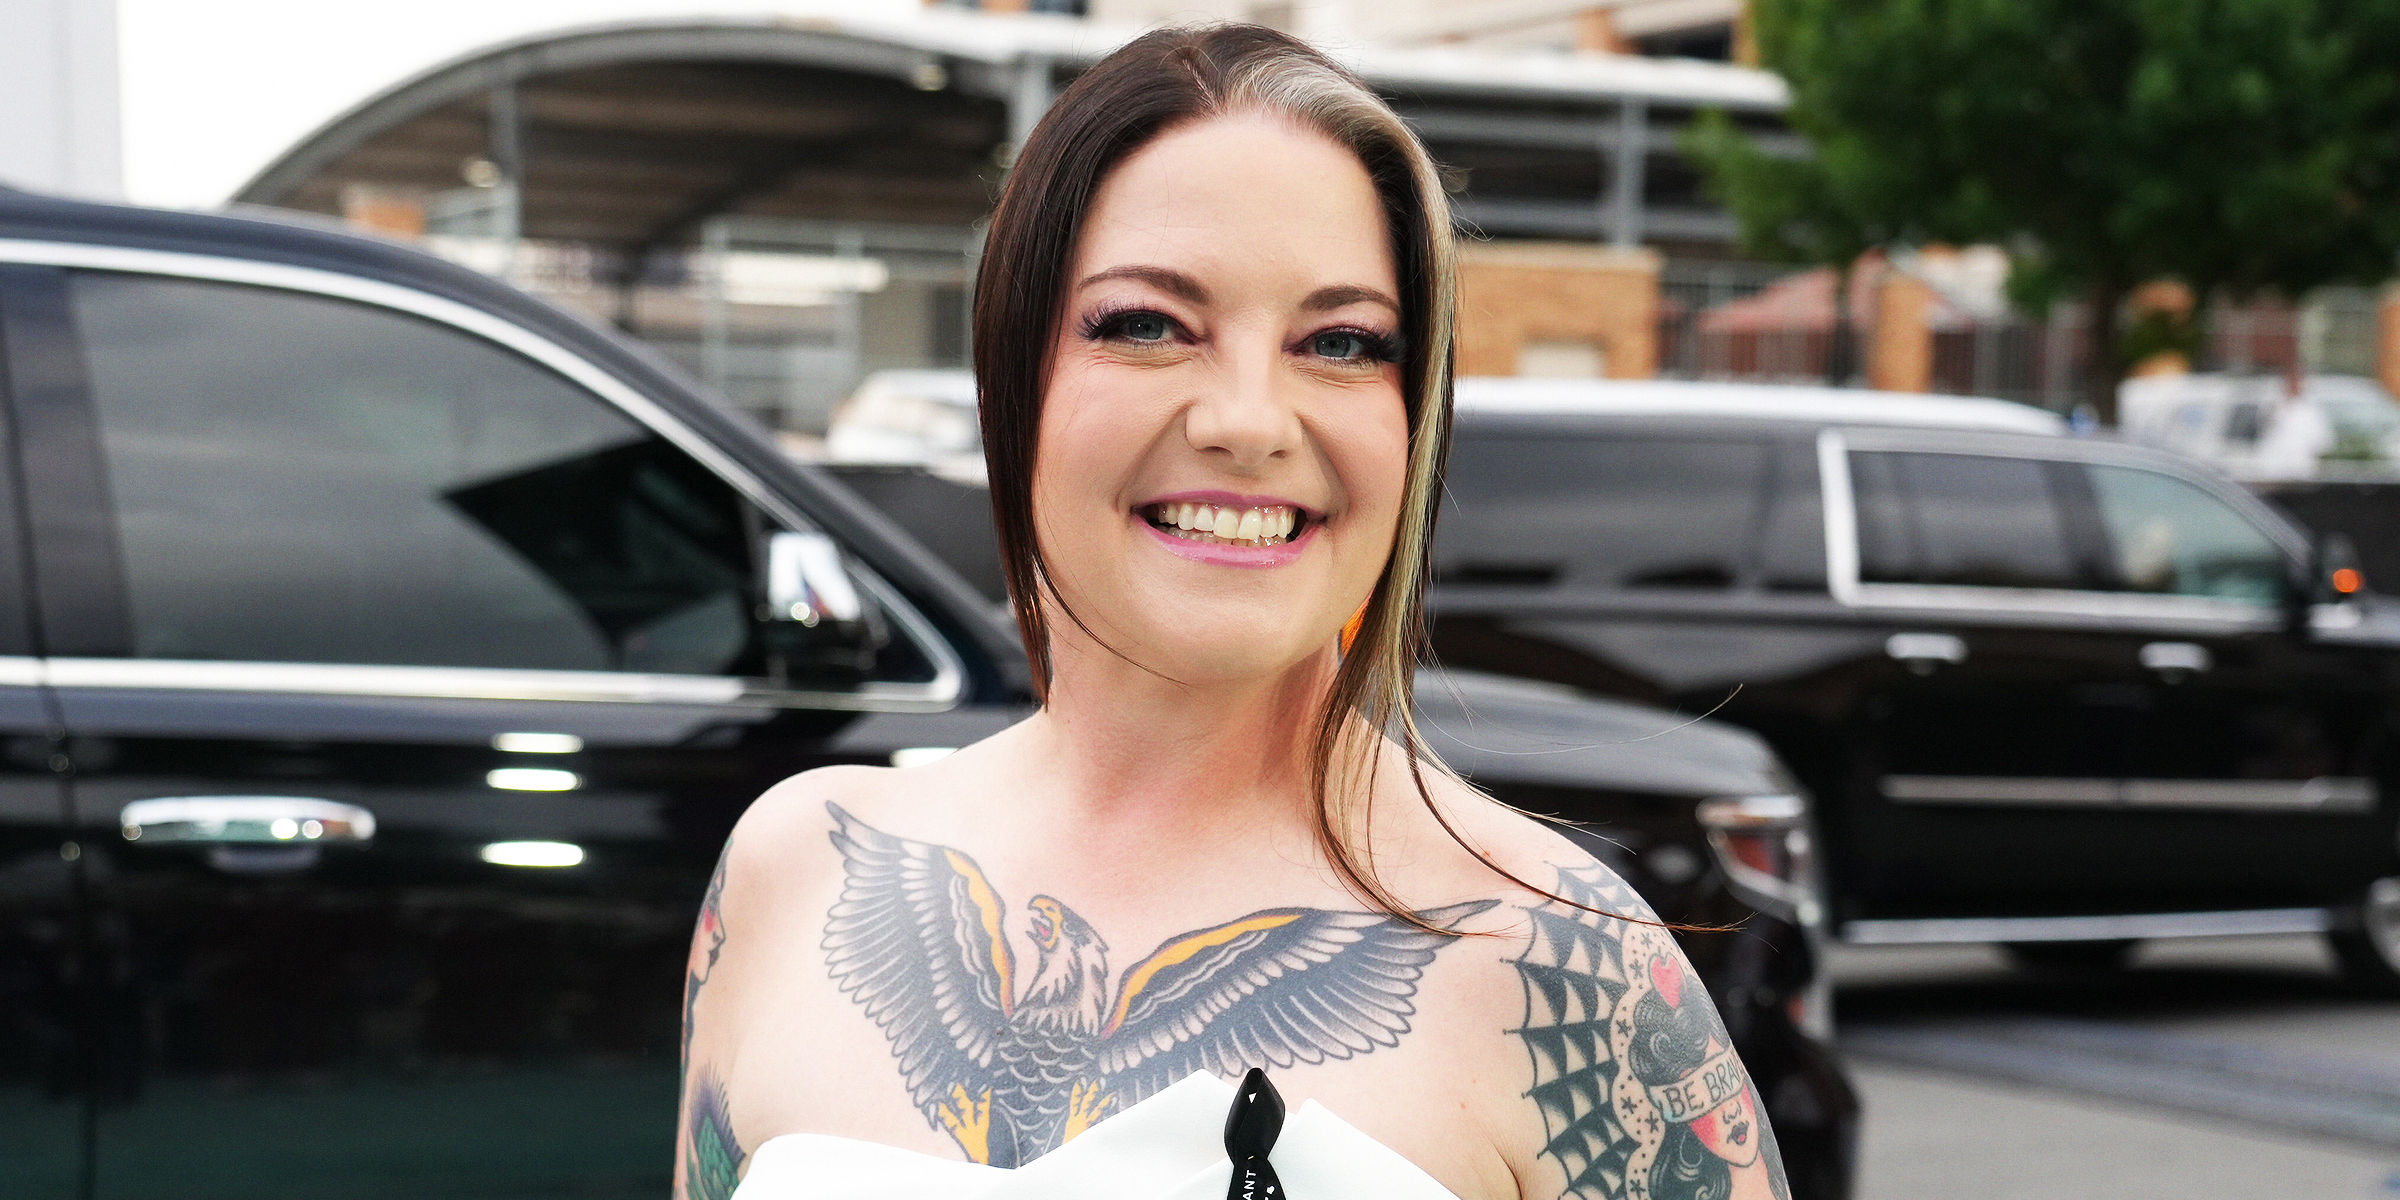 Ashley McBryde | Source: Getty Images